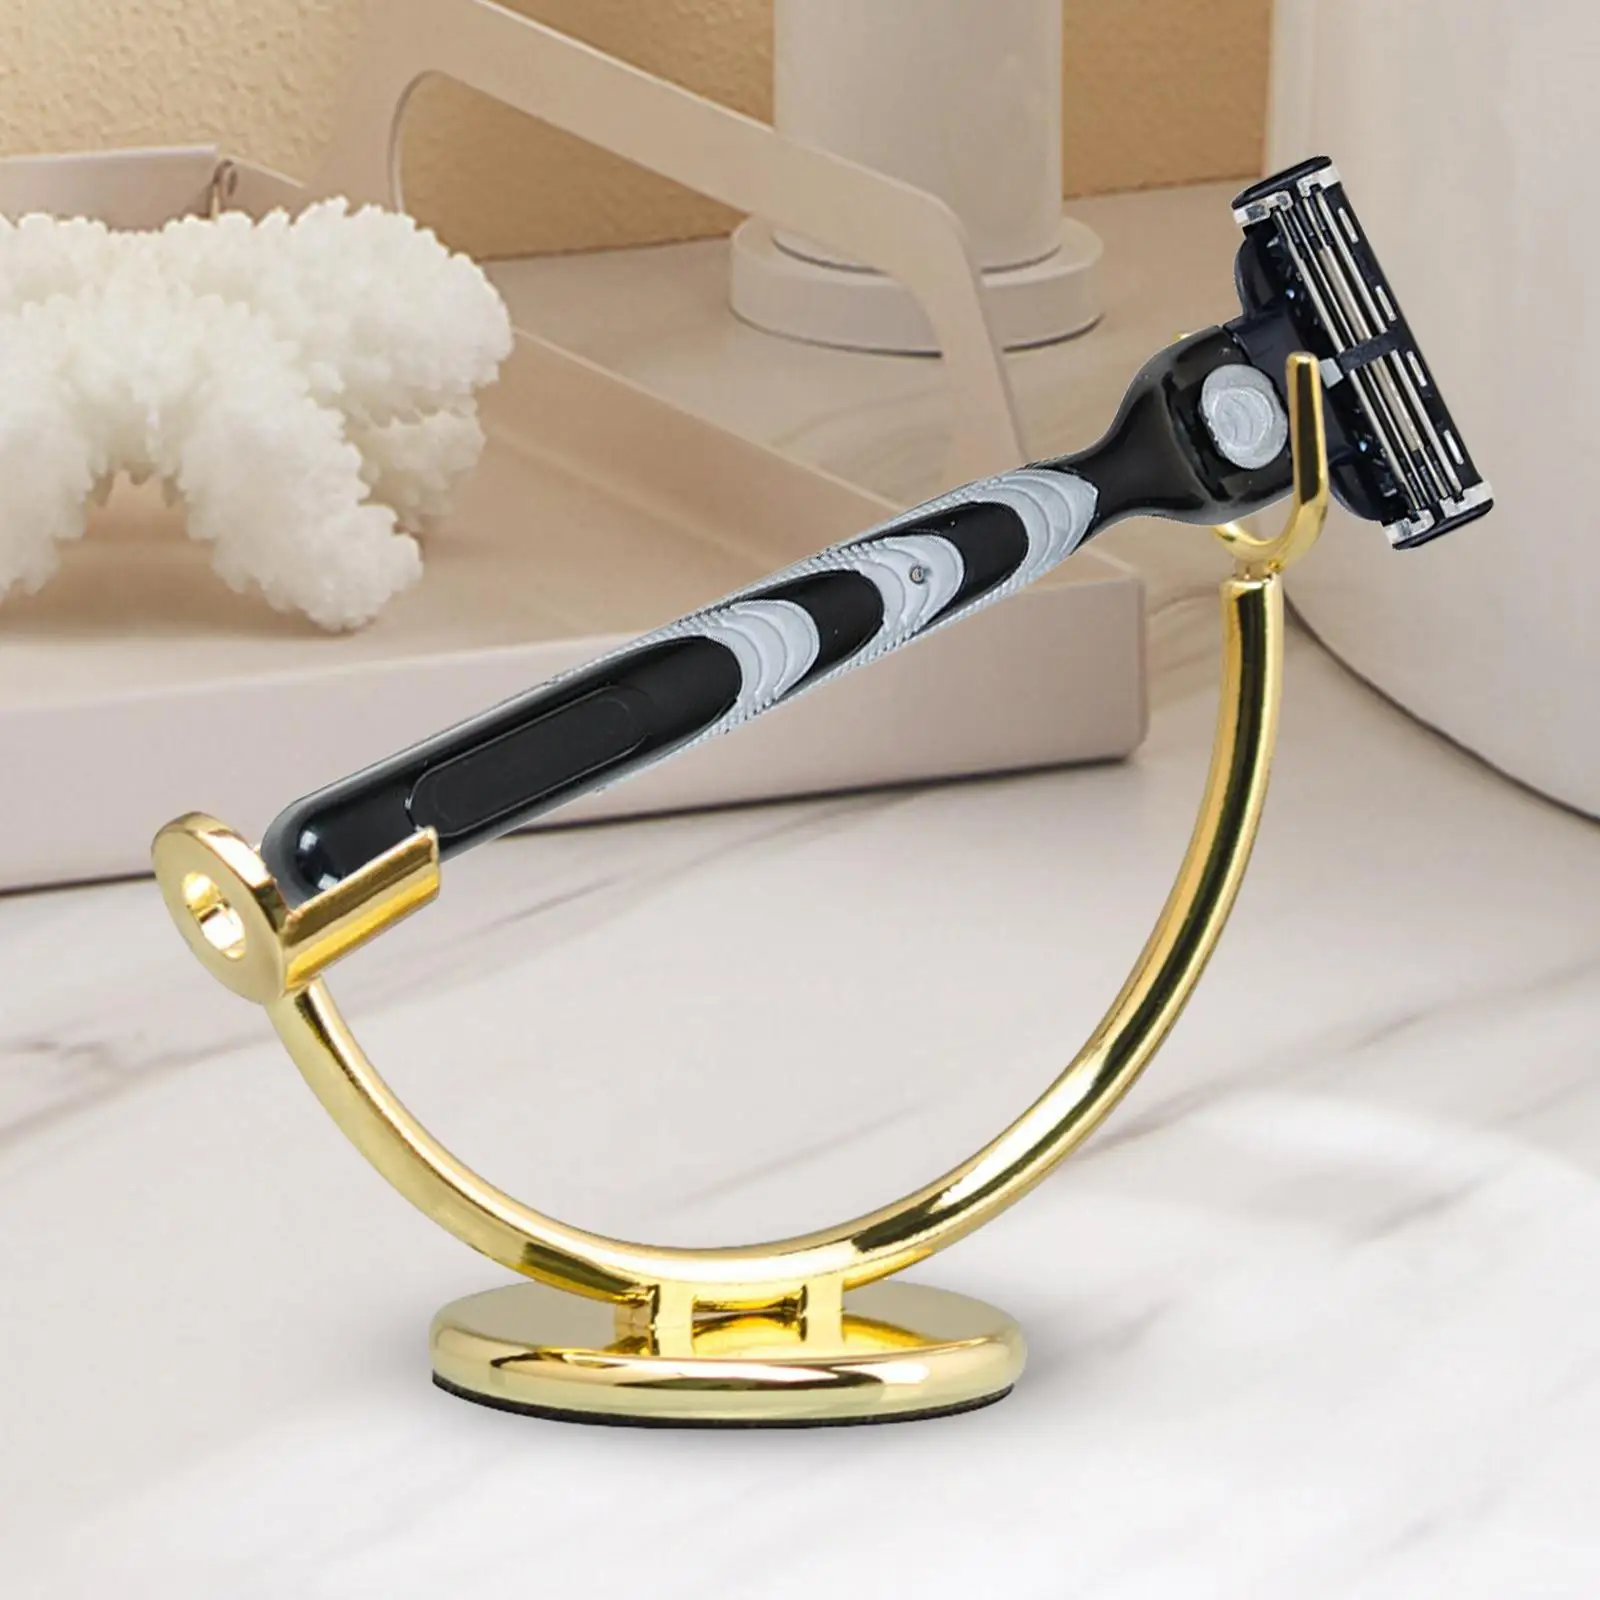 Single Head Shaver Bracket Accessory Durable Curved Shaver Holder Stand for Bathroom Barbershop Home Use Storage Stand Rack